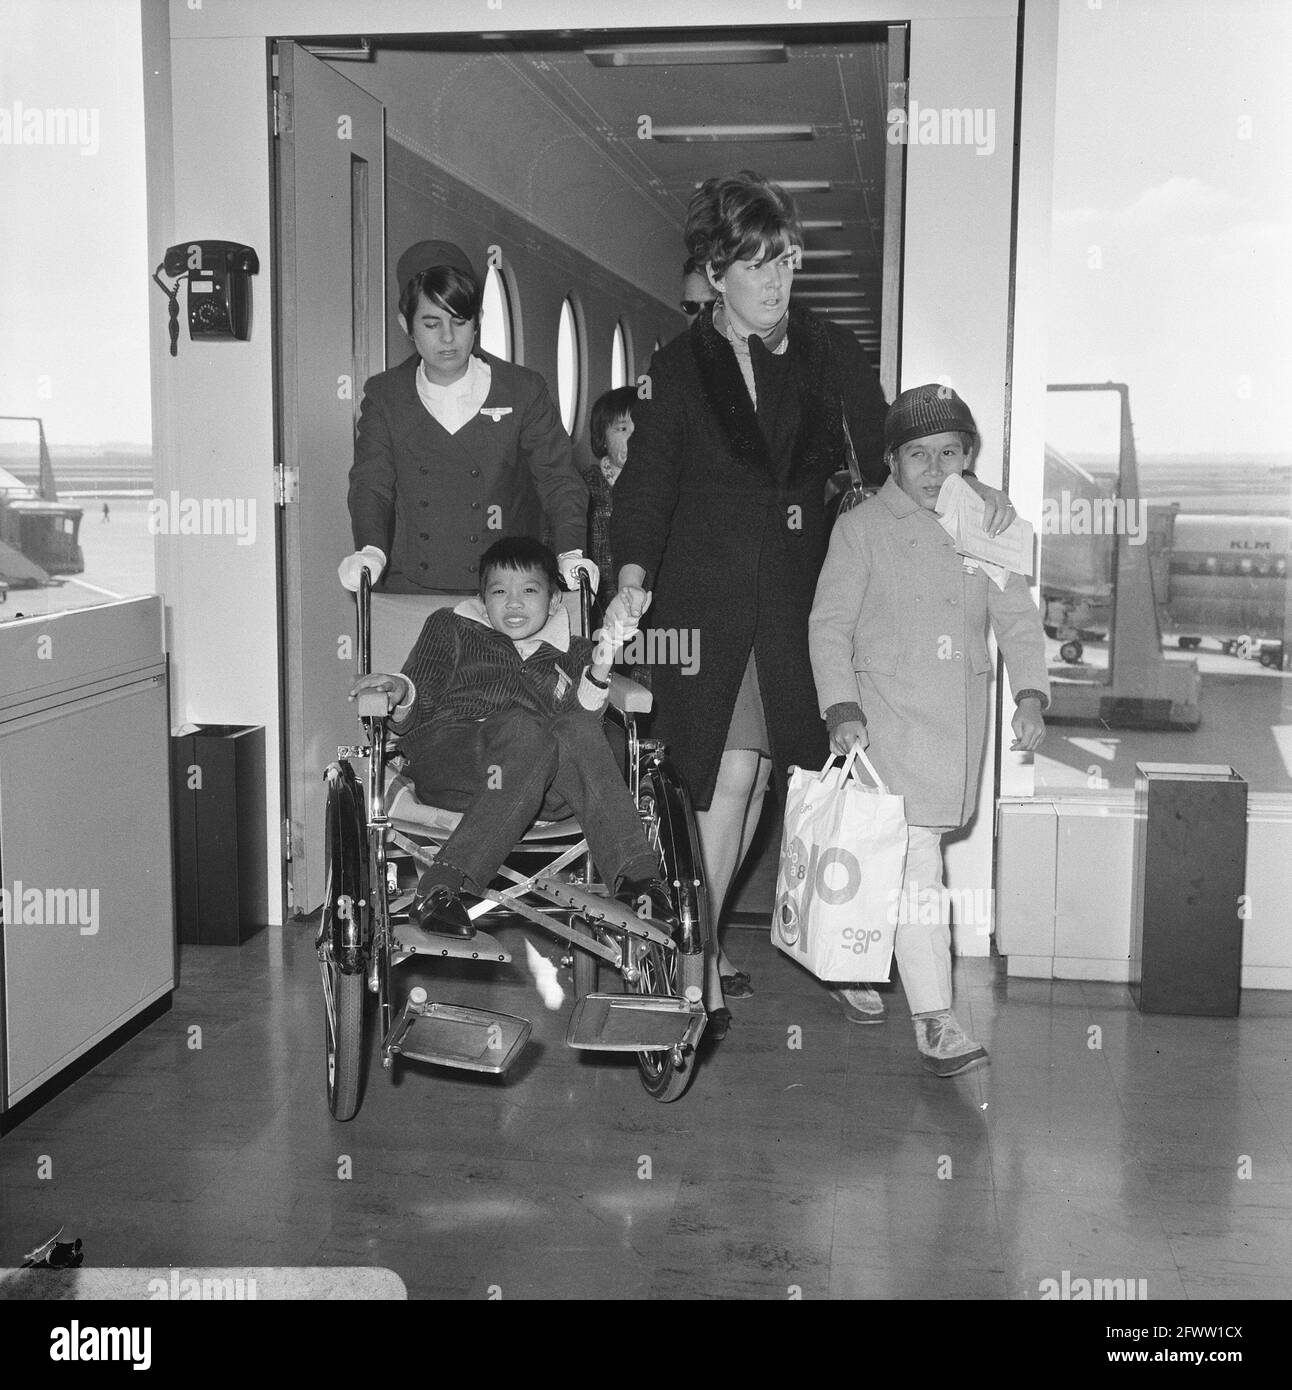 Three more children arrived at Schiphol Airport from Vietnam who were seriously injured by the war there. The children, two girls and a boy, were brought to the Netherlands by the Terre des Hommes foundation. For the time being they are going to a clinic in Huizen (N.H.). Two of the three children at arrival at Schiphol Airport, in the chair the boy (injured by mine explosion) and on the right a girl (burns), 27 February 1968, arrivals, health care, children, patients, airports, The Netherlands, 20th century press agency photo, news to remember, documentary, historic photography 1945-1990 Stock Photo